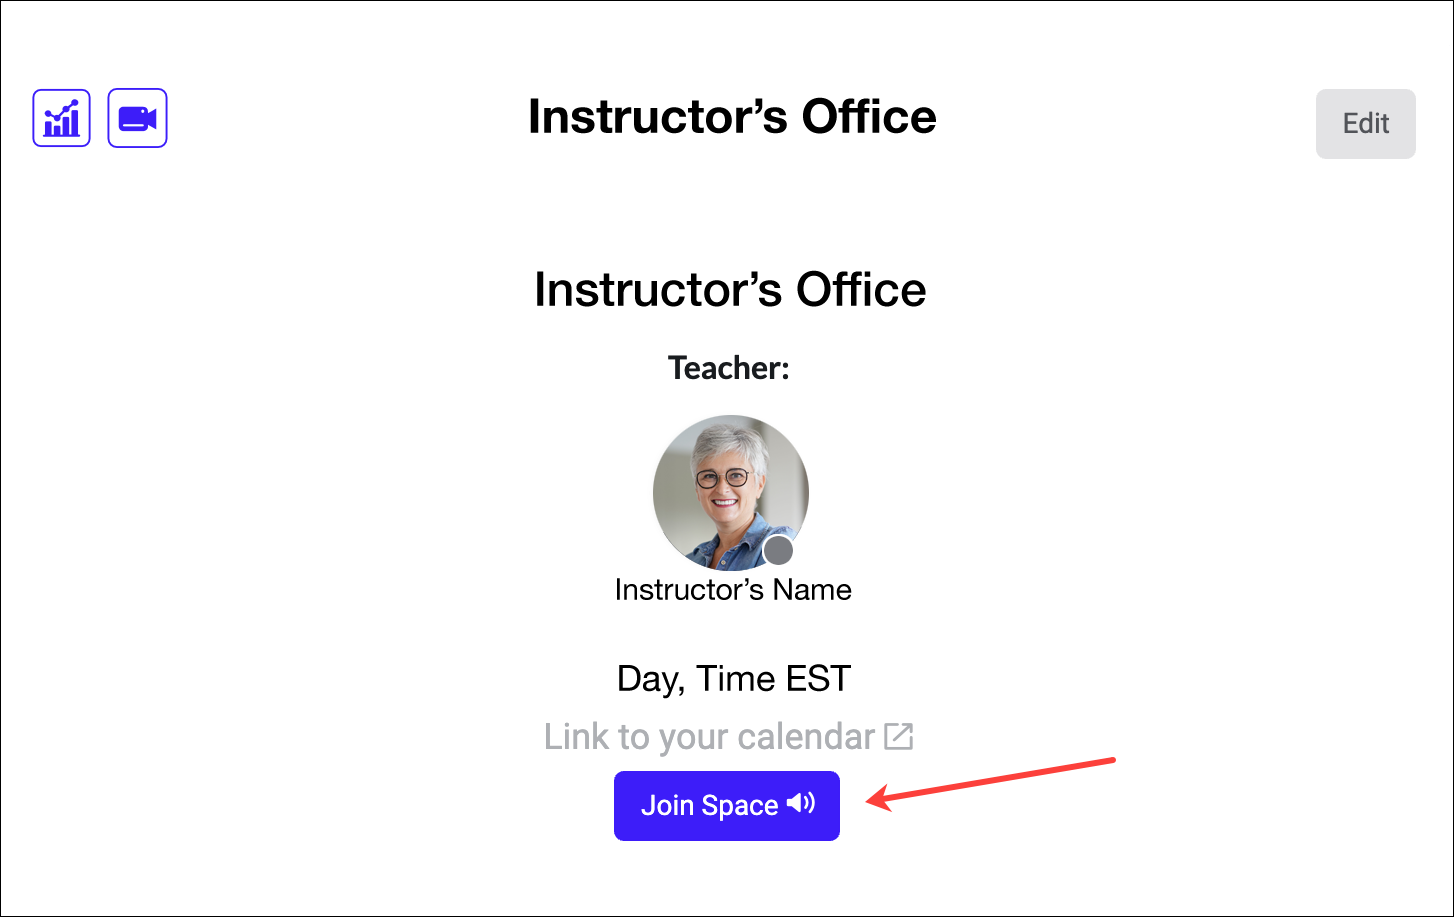 InSpace Instructor's Office Join Space prompt